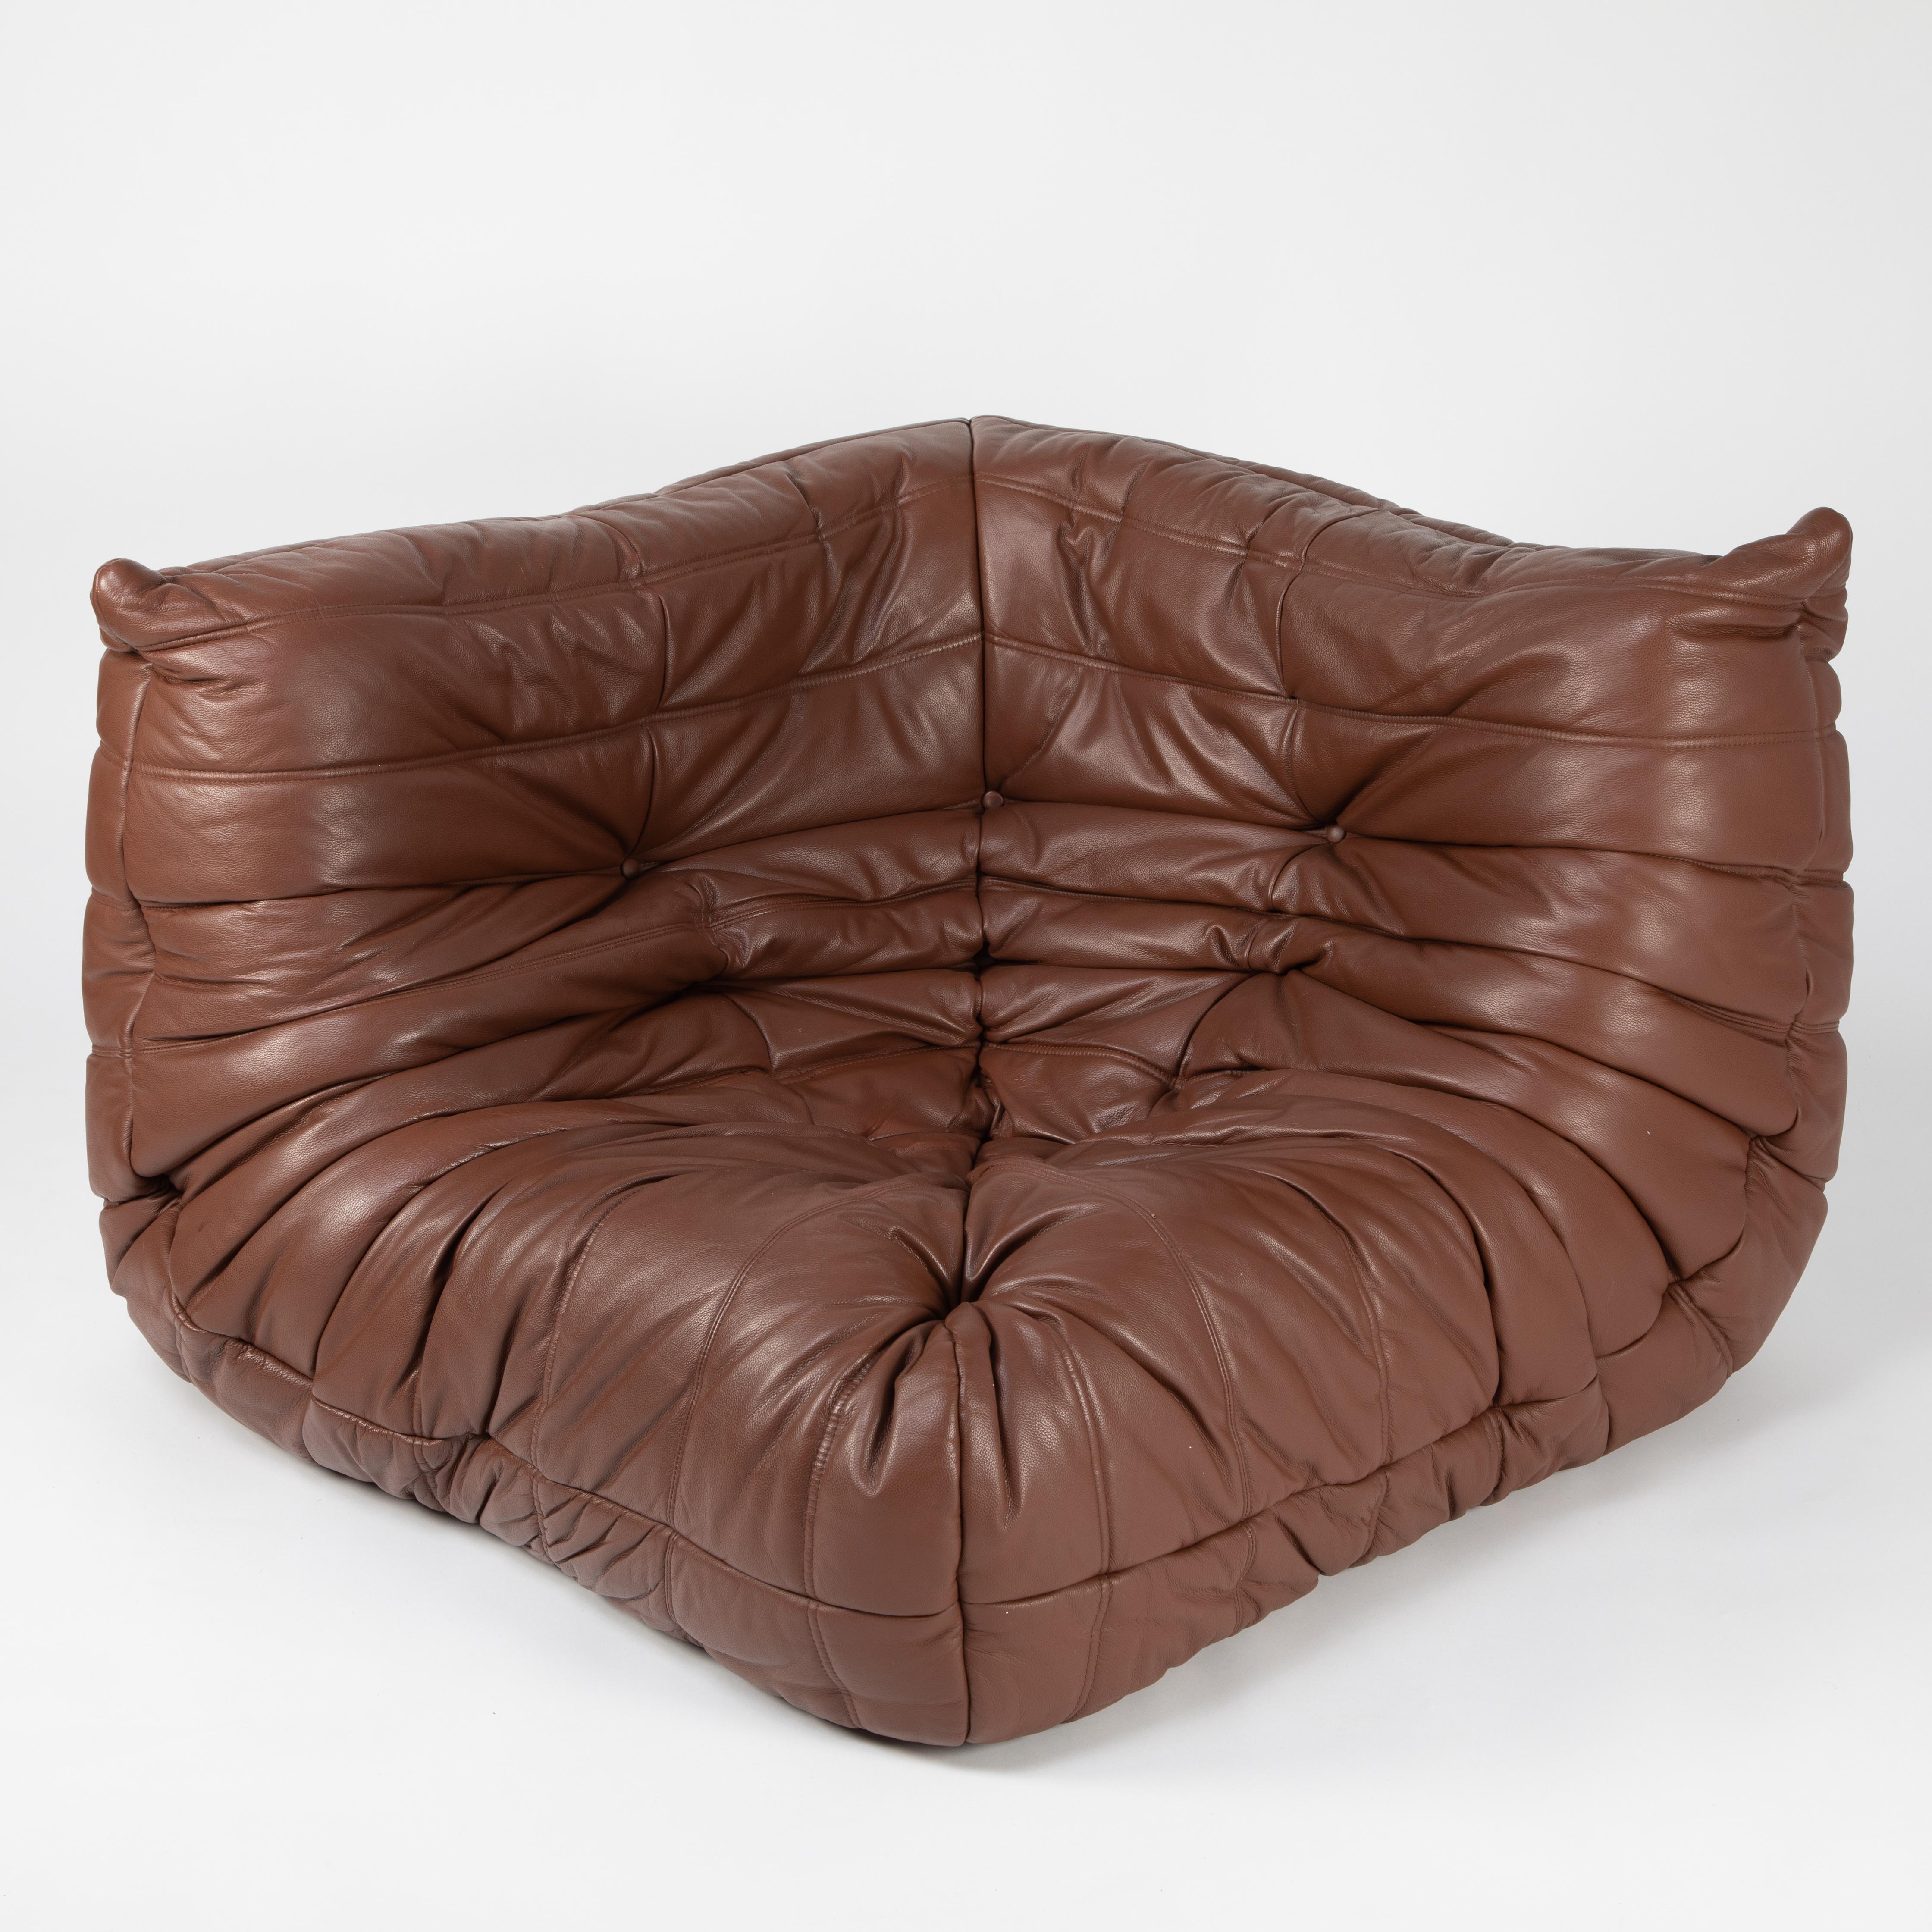 Extraordinarily comfortable classic corner chair from French designer Michel Ducaroy's Togo line for Ligne Roset. Designed in 1973, the Togo collection features ergonomic all-foam forms with quilted covers, this example in a lovely whiskey-color